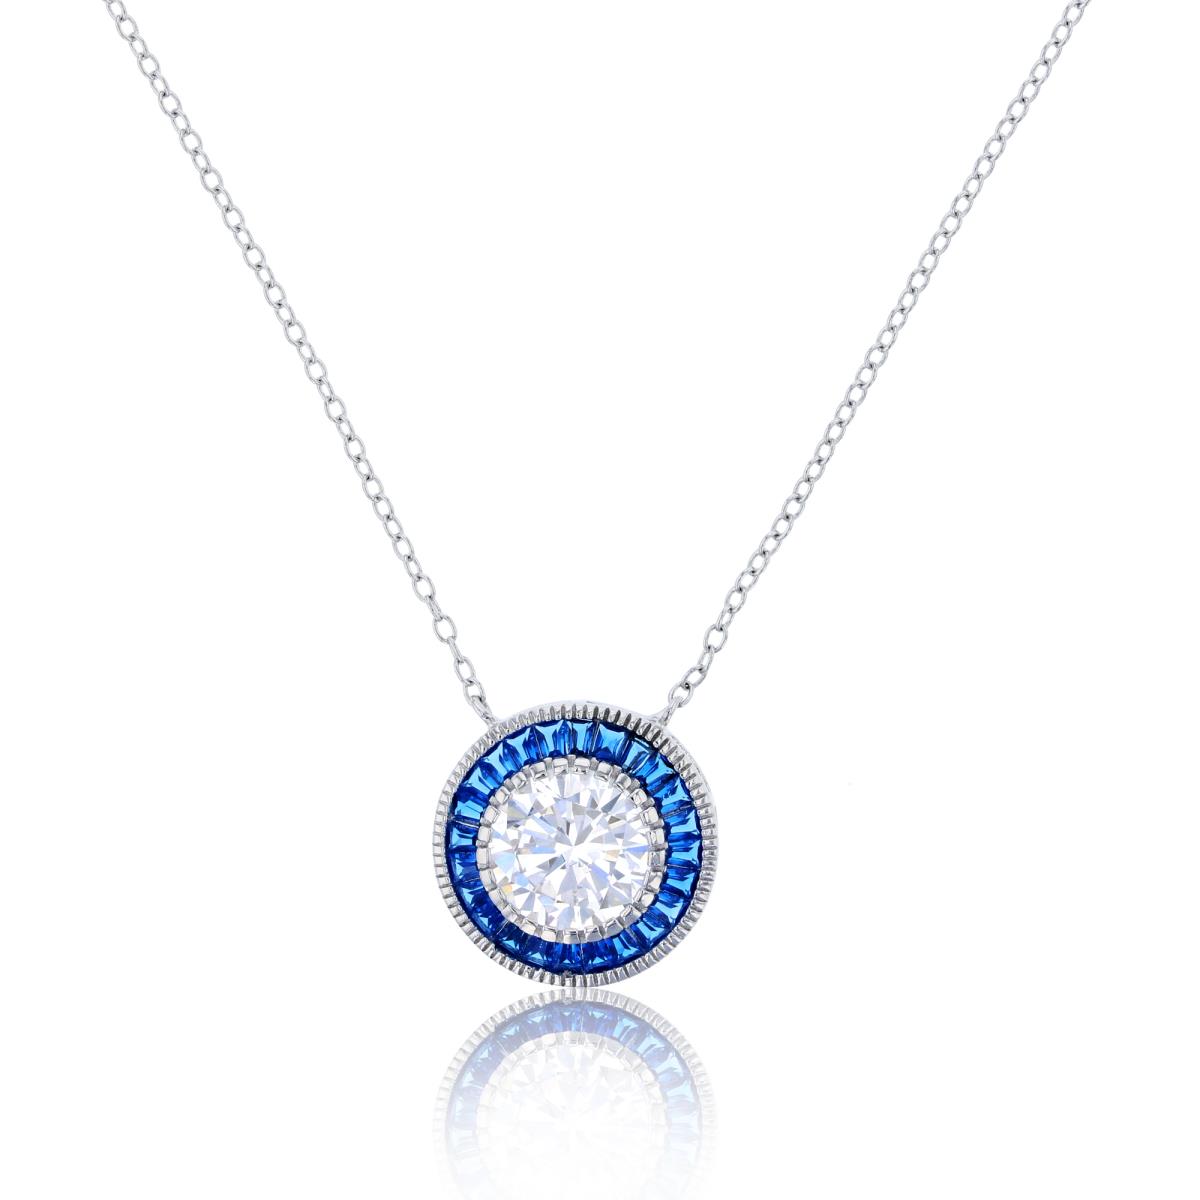 Sterling Silver Rhodium 8mm White Rd Cut CZ & Blue Spinel Baguette Circle 16"+2" Necklace